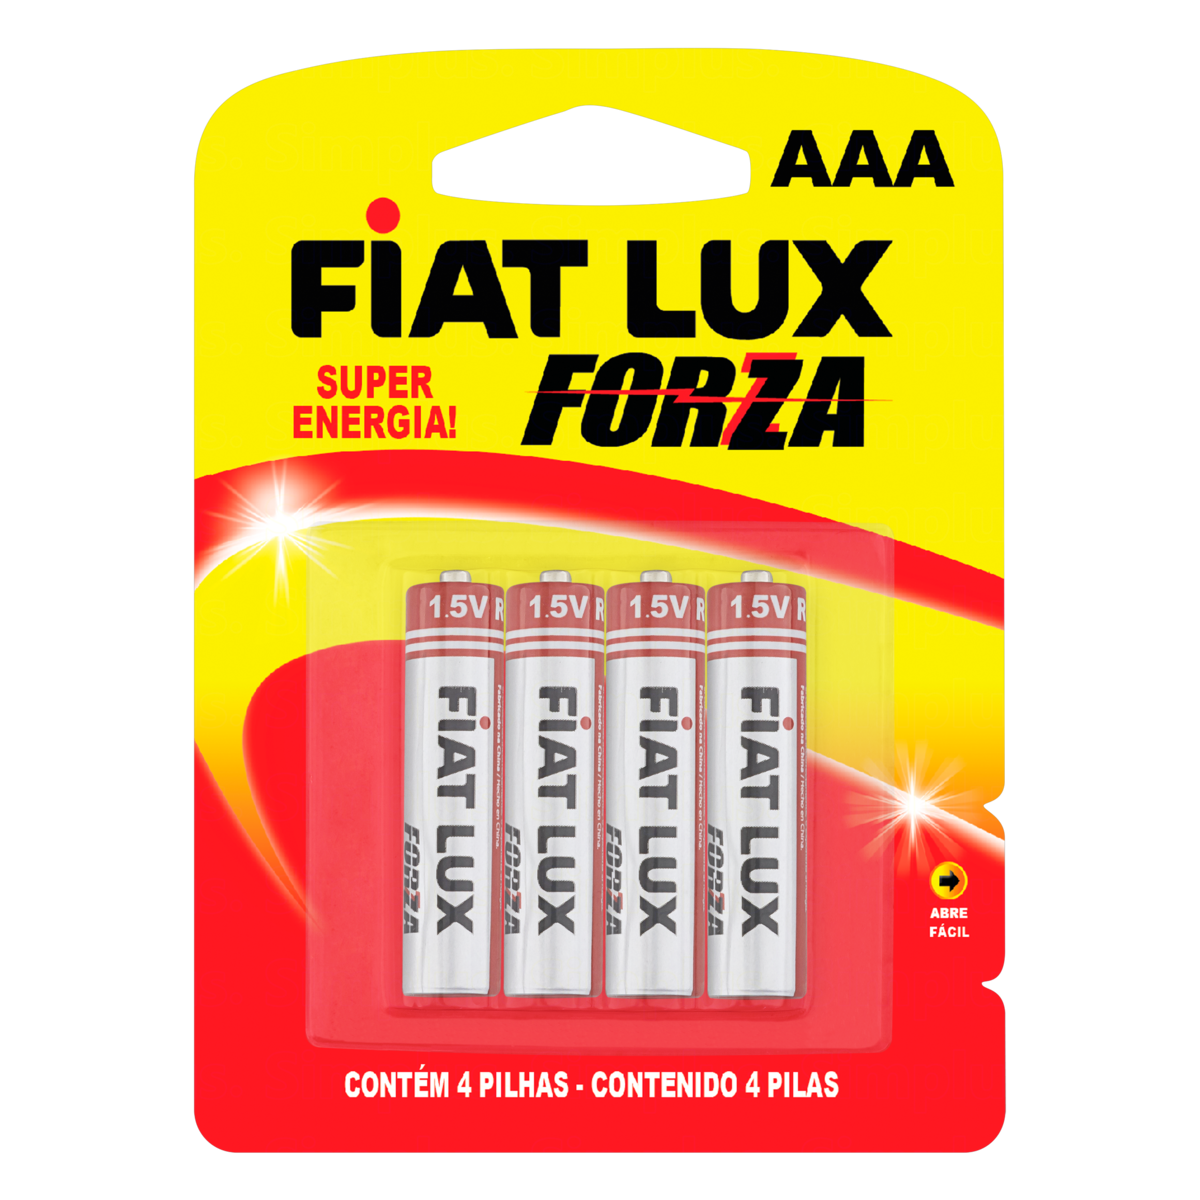 7896007974474 - PILHA COMUM AAA R03 FIAT LUX FORZA 4 UNIDADES 1,5V